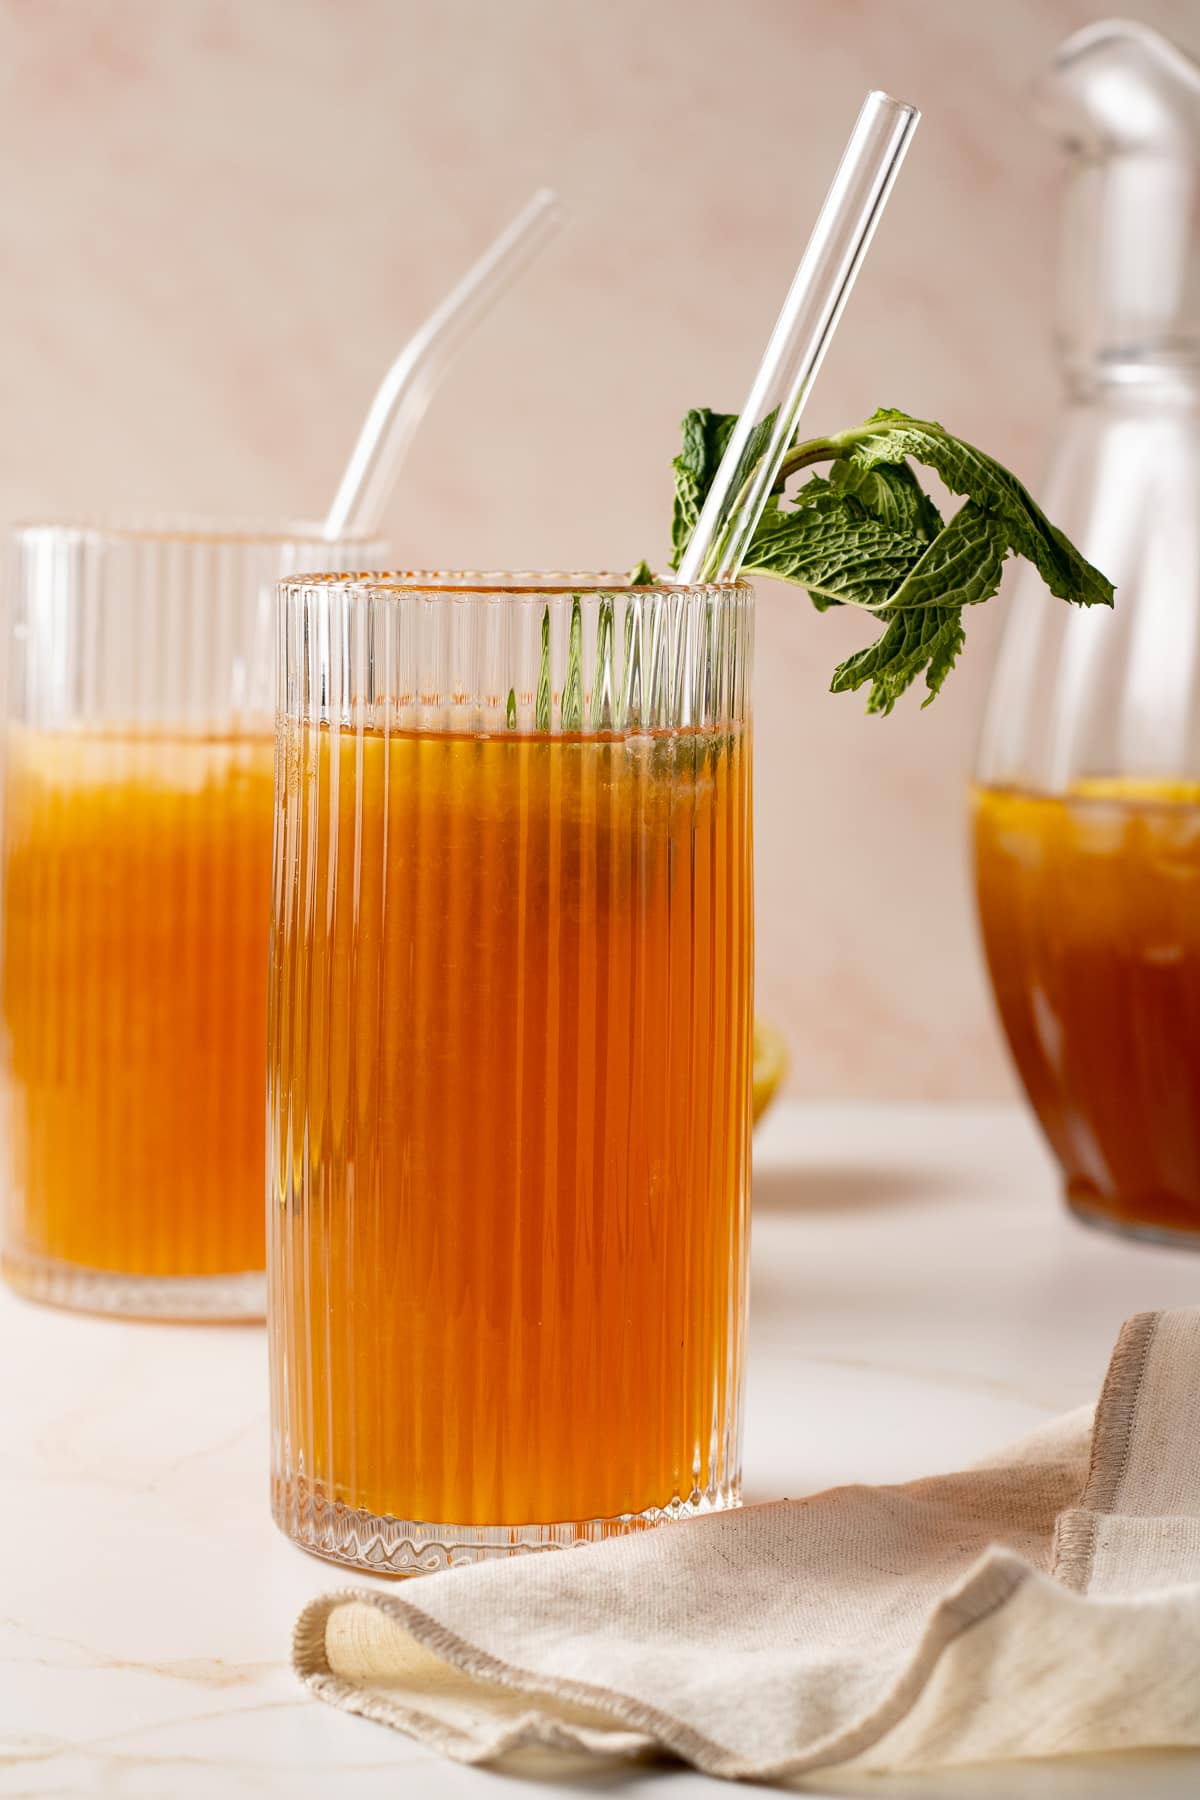 Tea lemonade in a glass with a sprig of fresh mint.